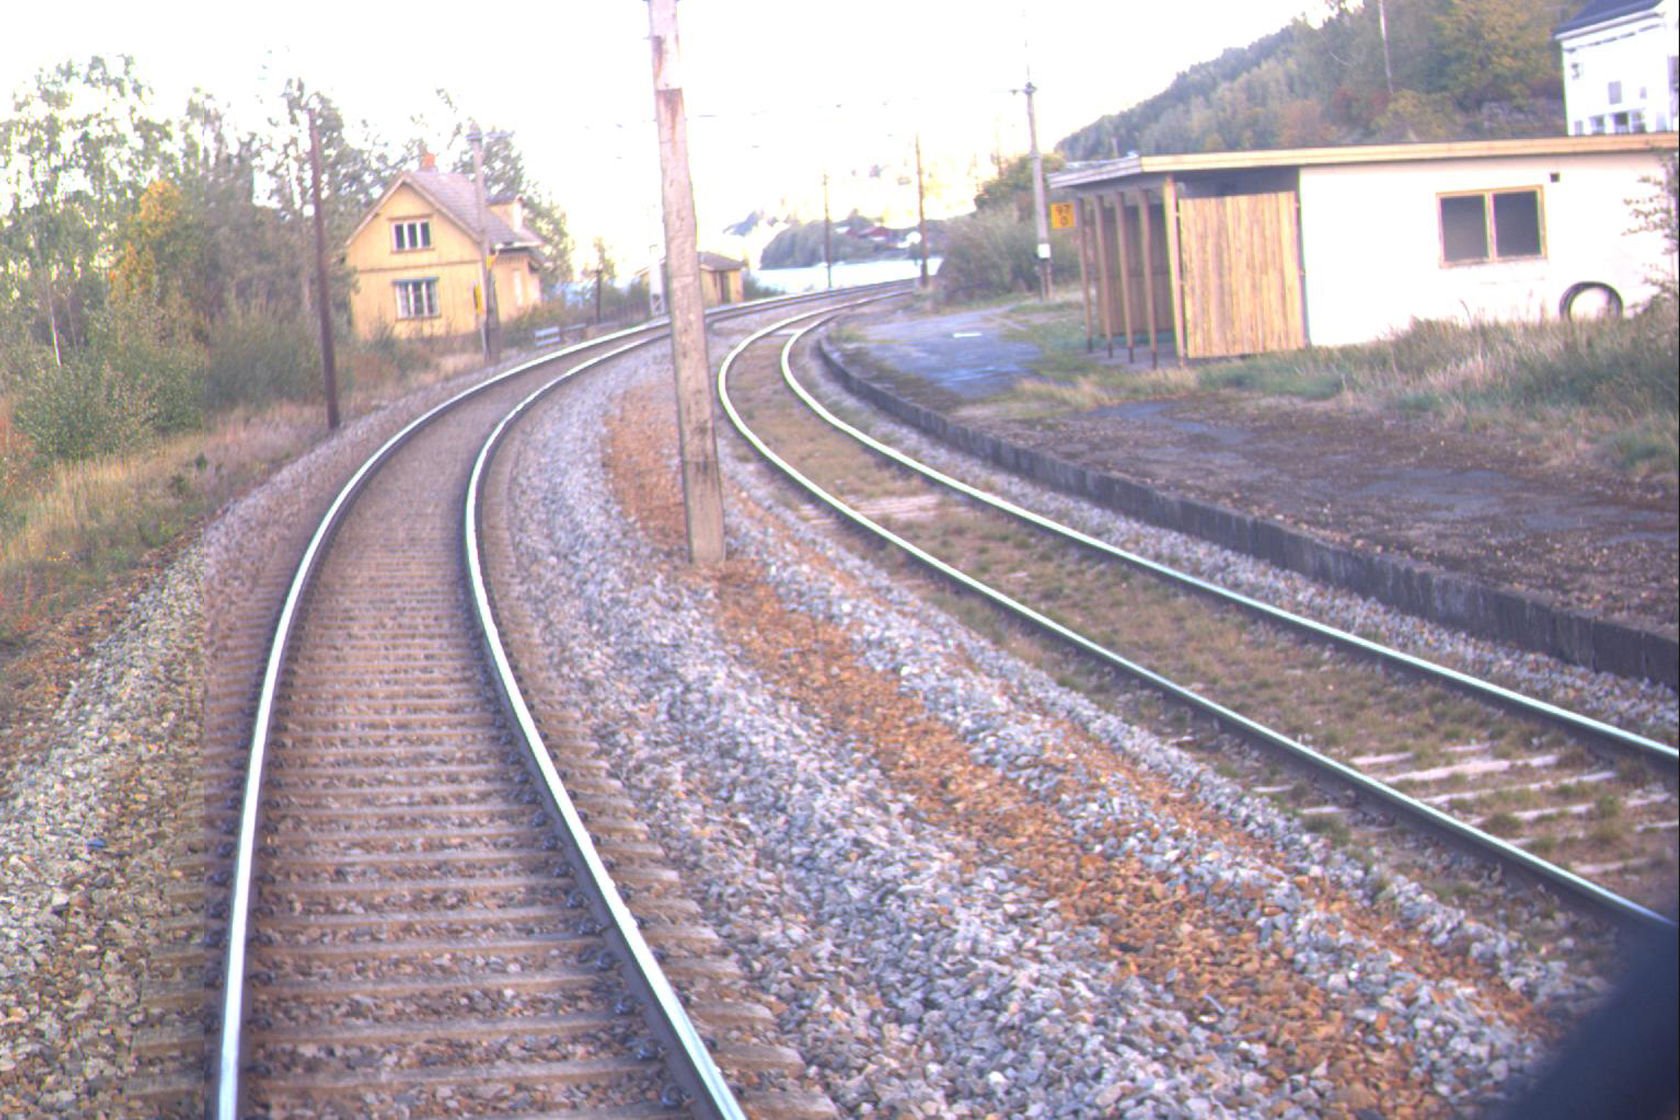 Tracks and buildings at Espa station